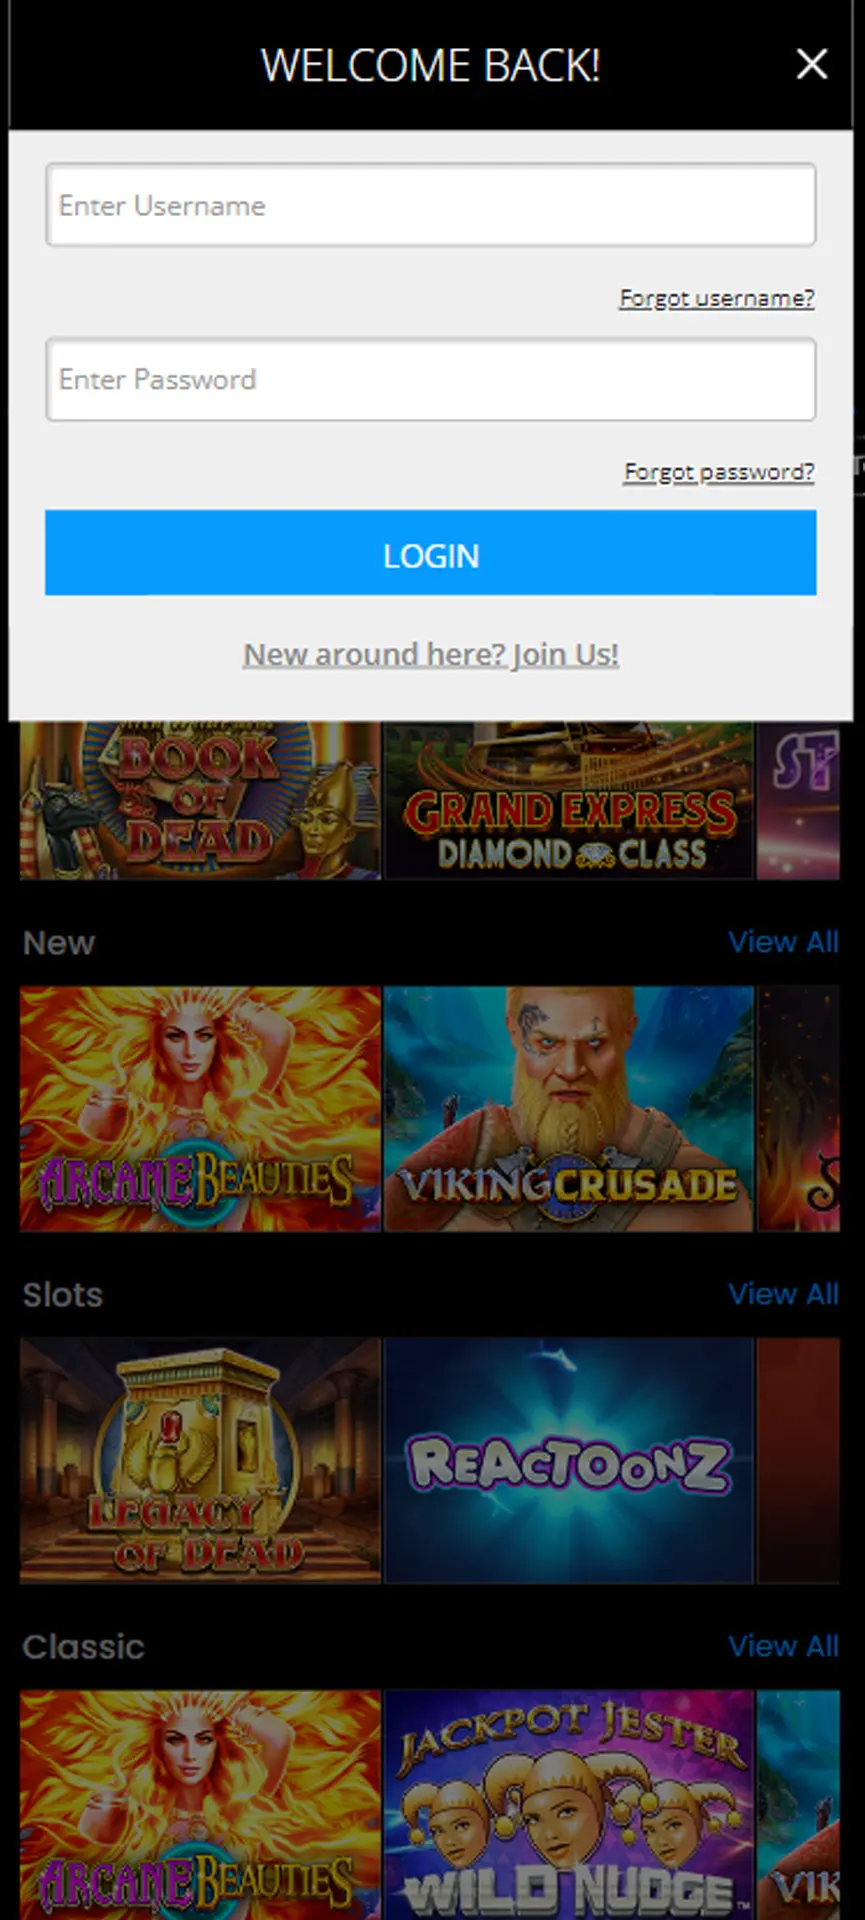 Log in after installation of the app.